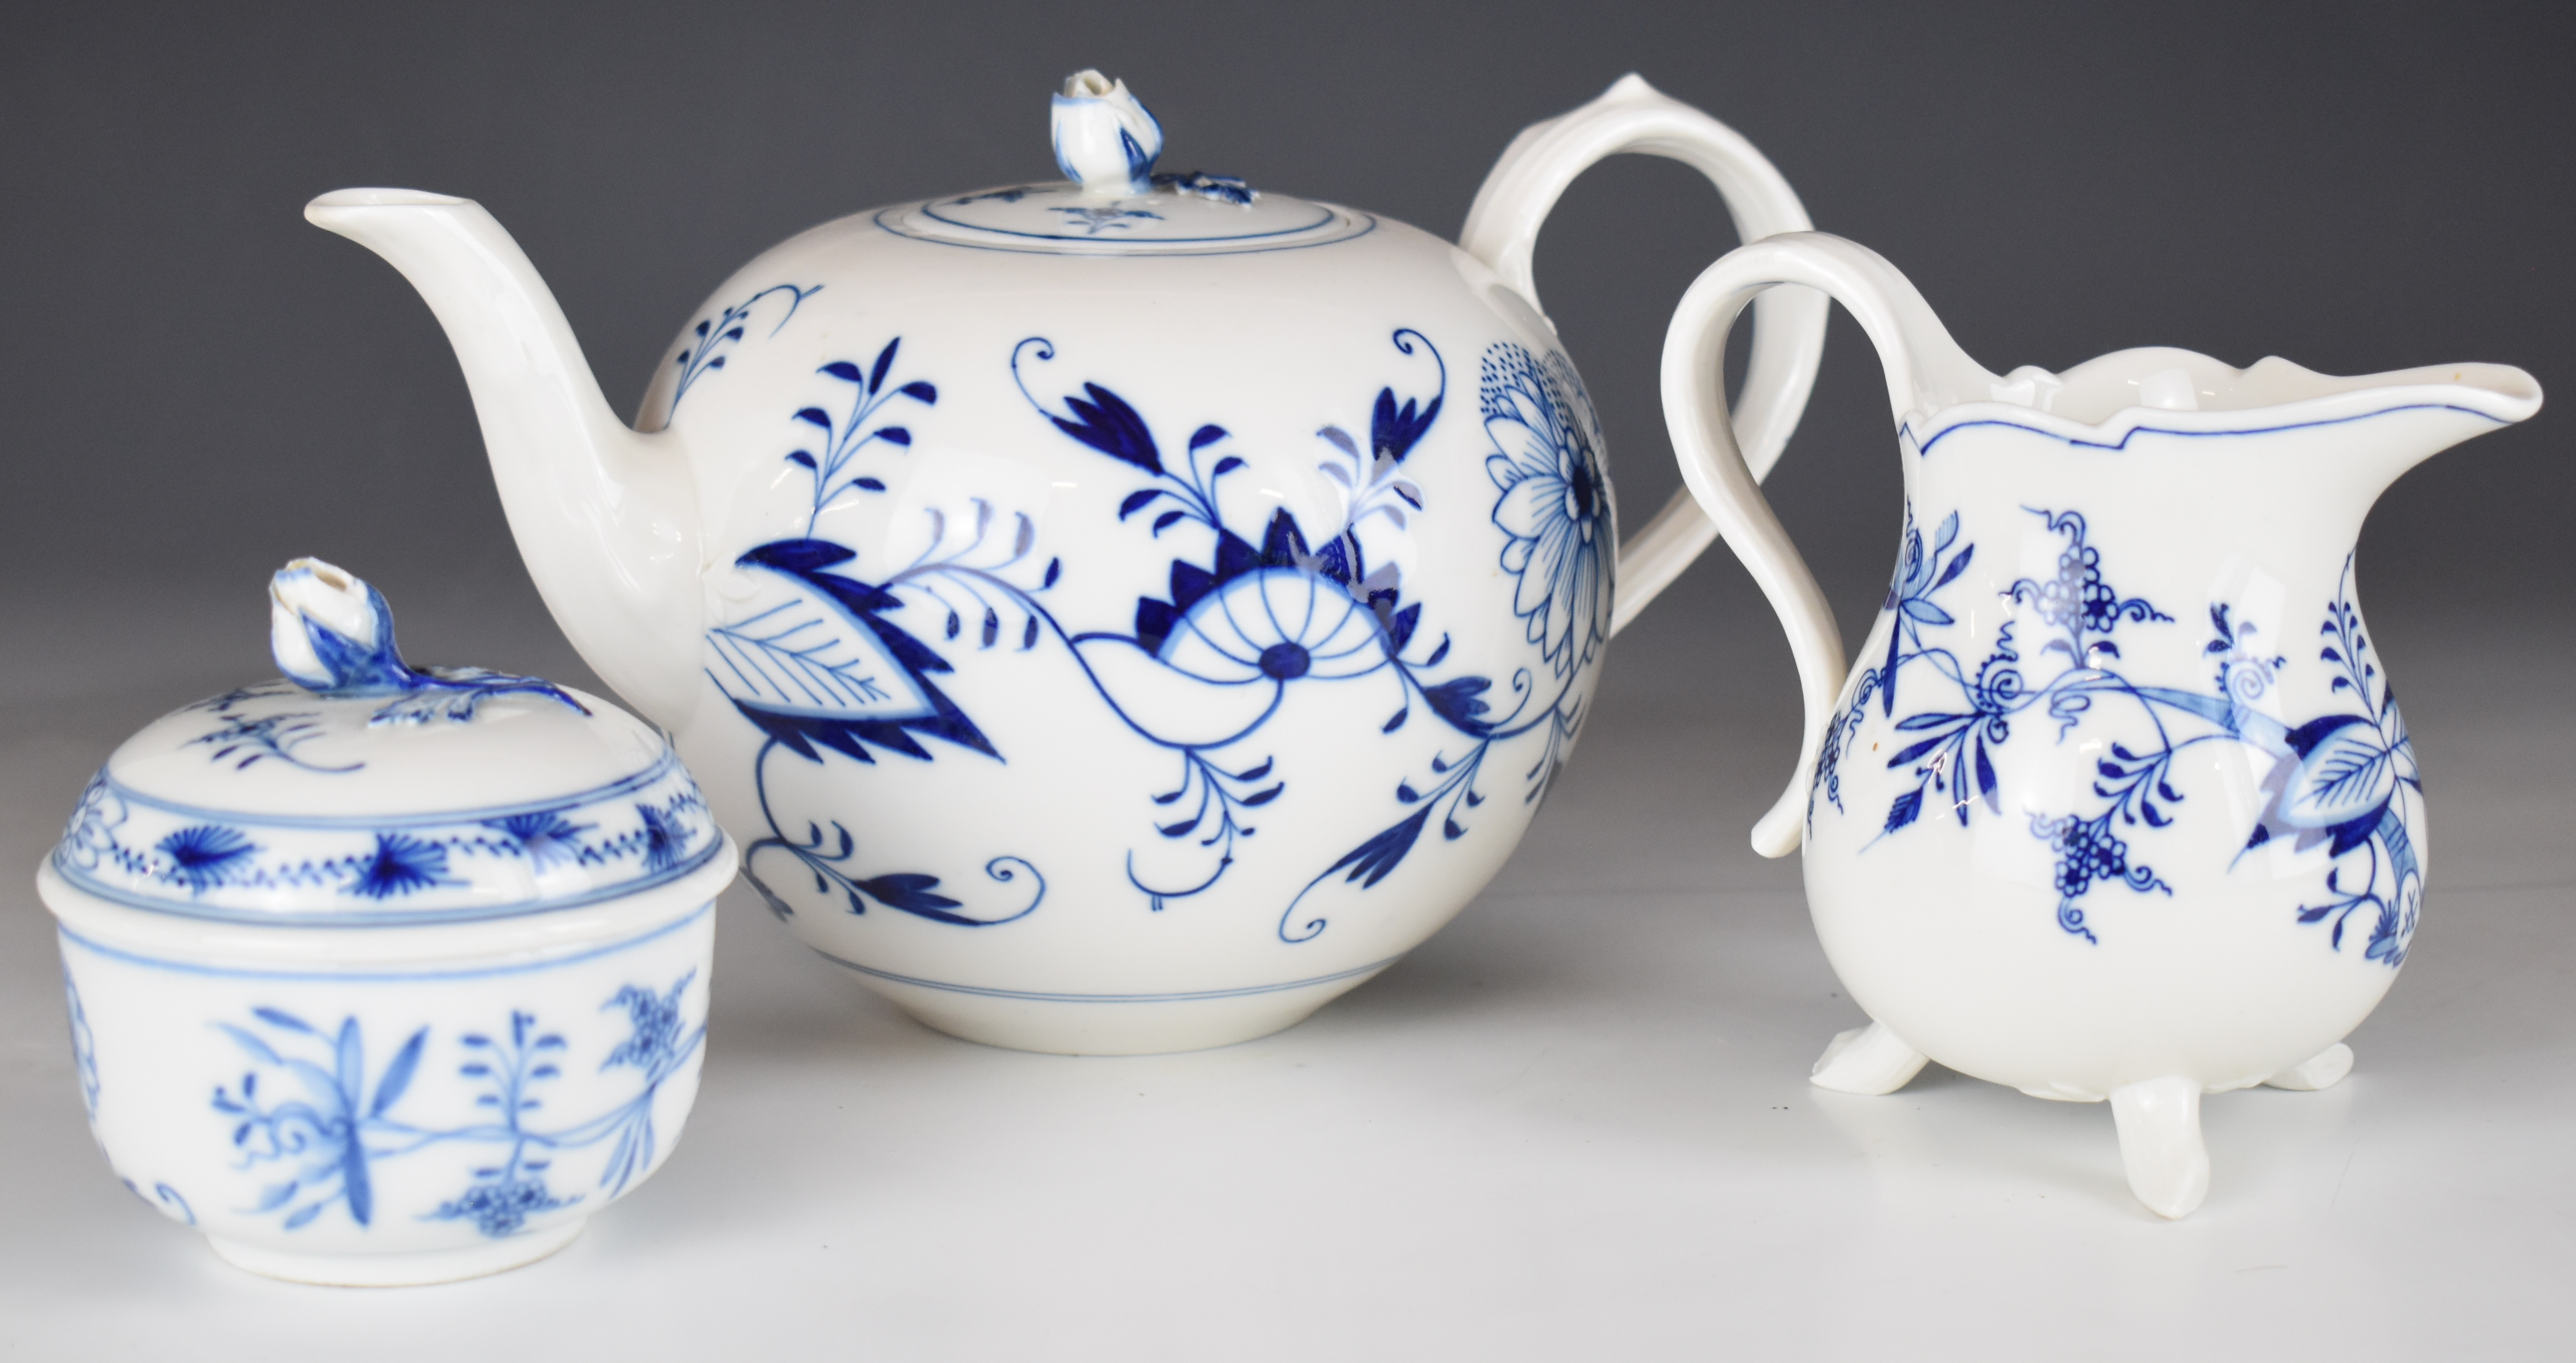 Meissen blue and white porcelain teapot, cream jug and covered sucrier, tallest 20cm - Image 7 of 12